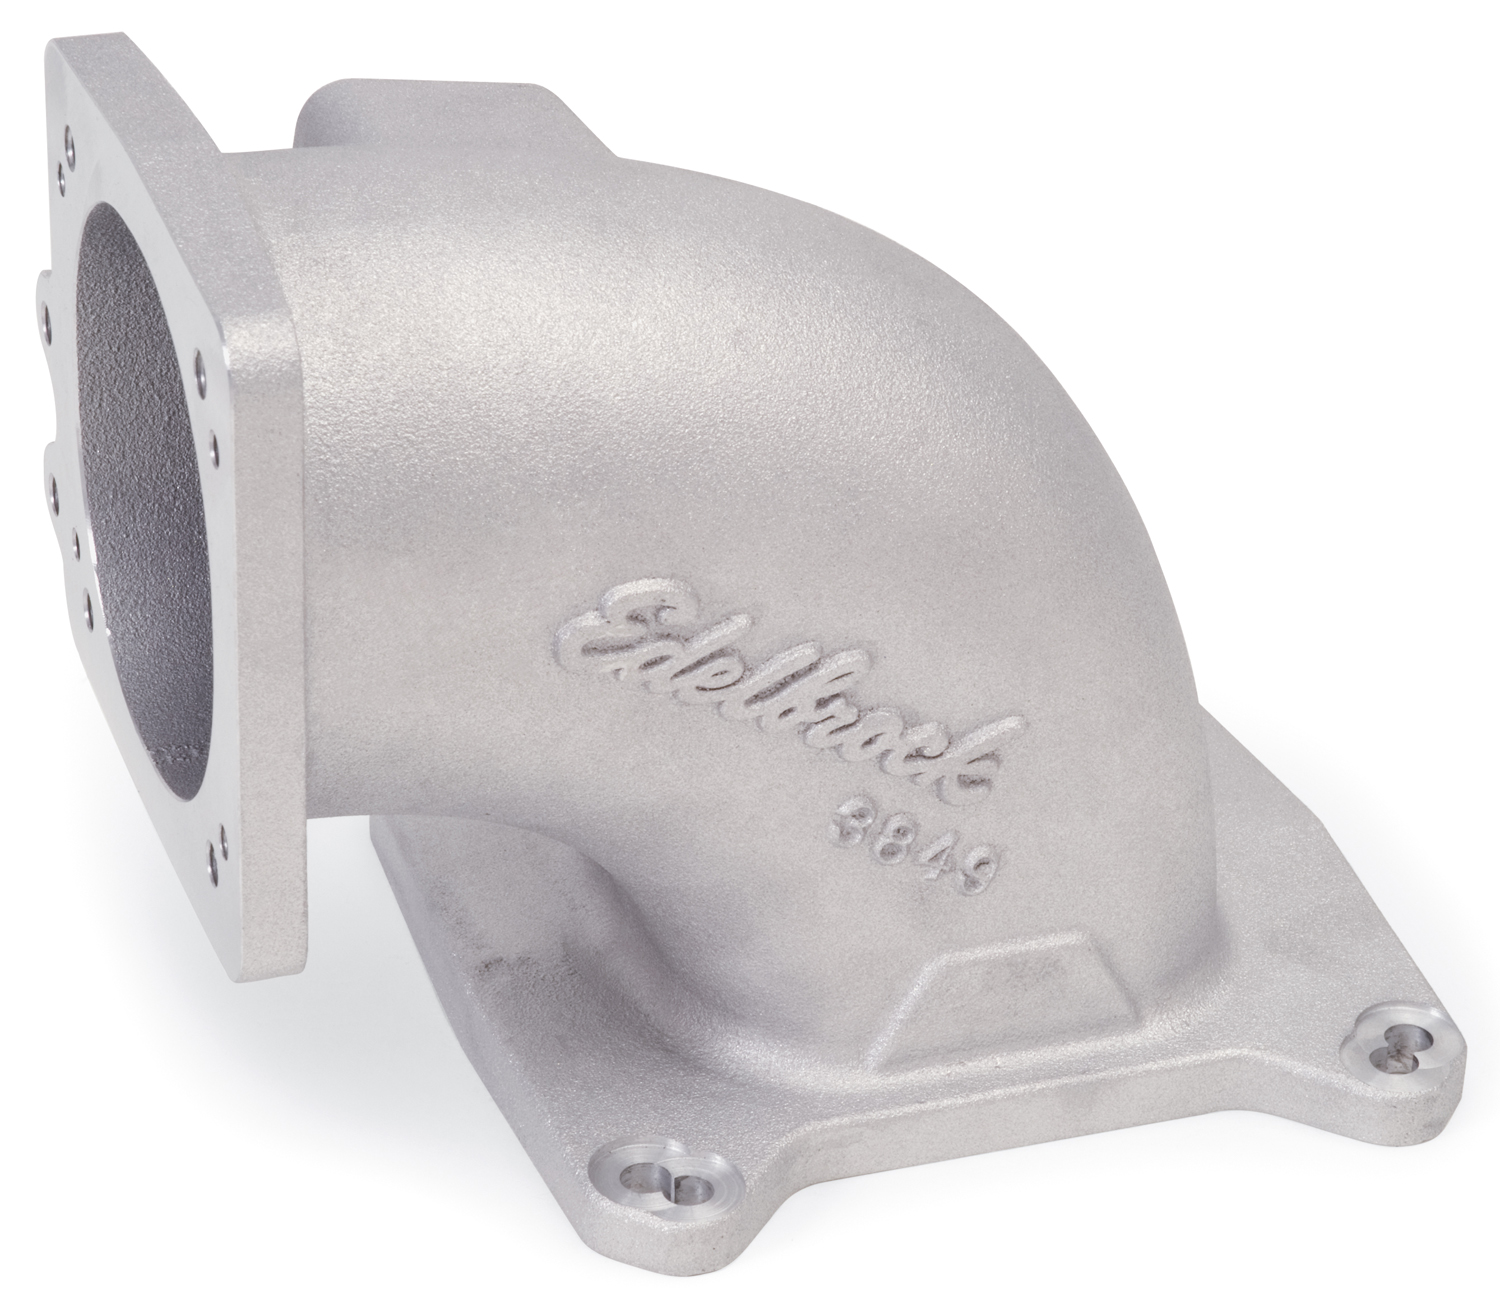 Edelbrock High Flow Intake Elbow, 95mm Throttle Body to Square-Bore Flange, as-cast finish, Part# 3849